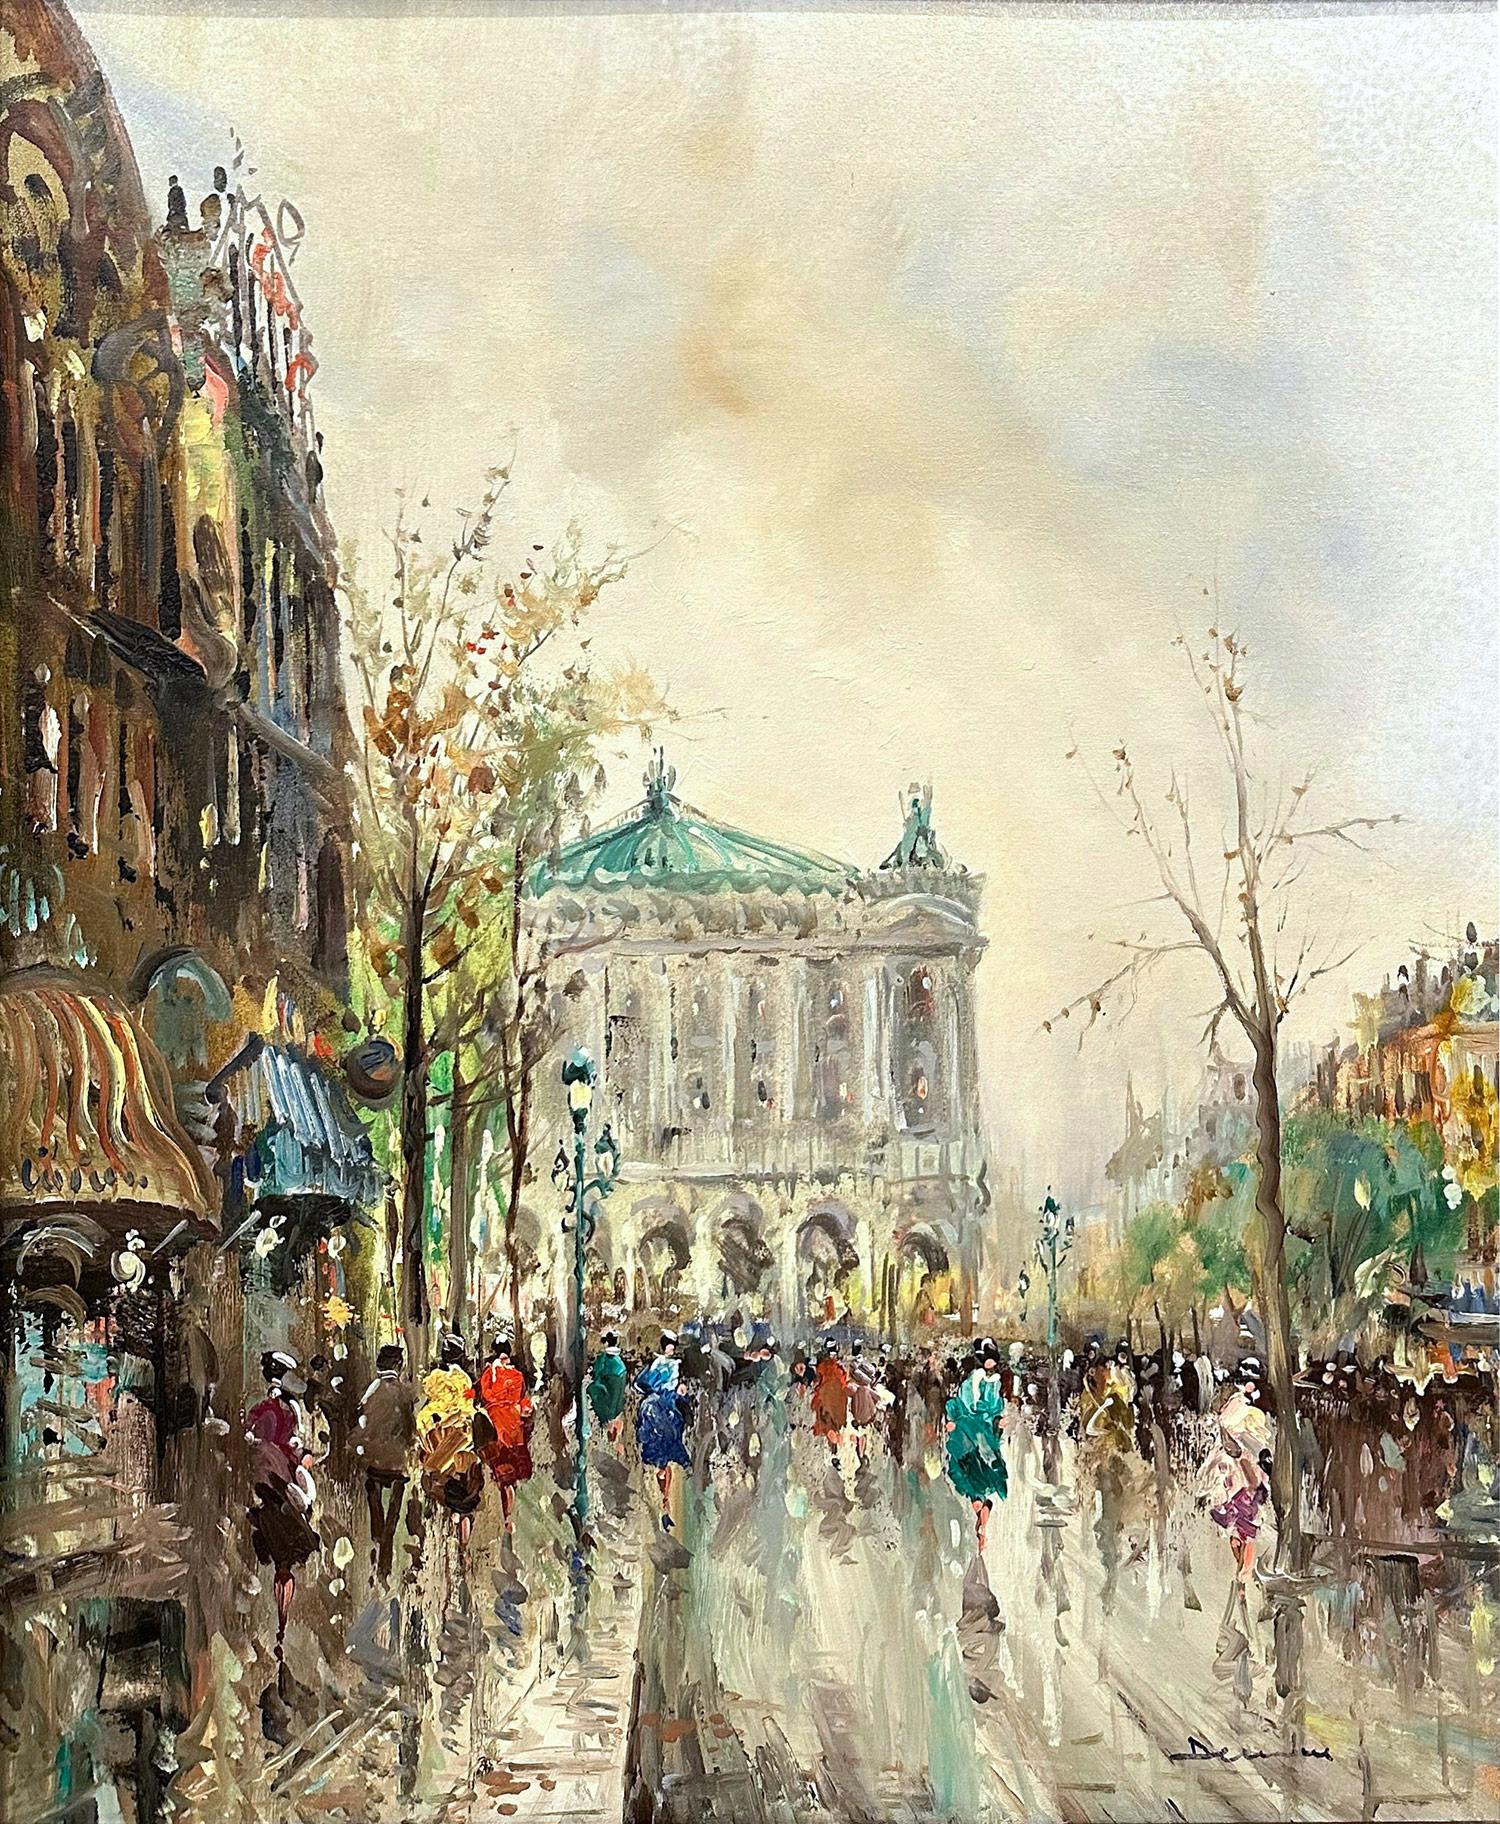 A beautiful oil on canvas painting by the French artist, Pietro Demone. Deomne was a Parisian painter known for his colorful cityscapes depicting the times of his generation. This painting is a wonderful example of his work from the prime of his